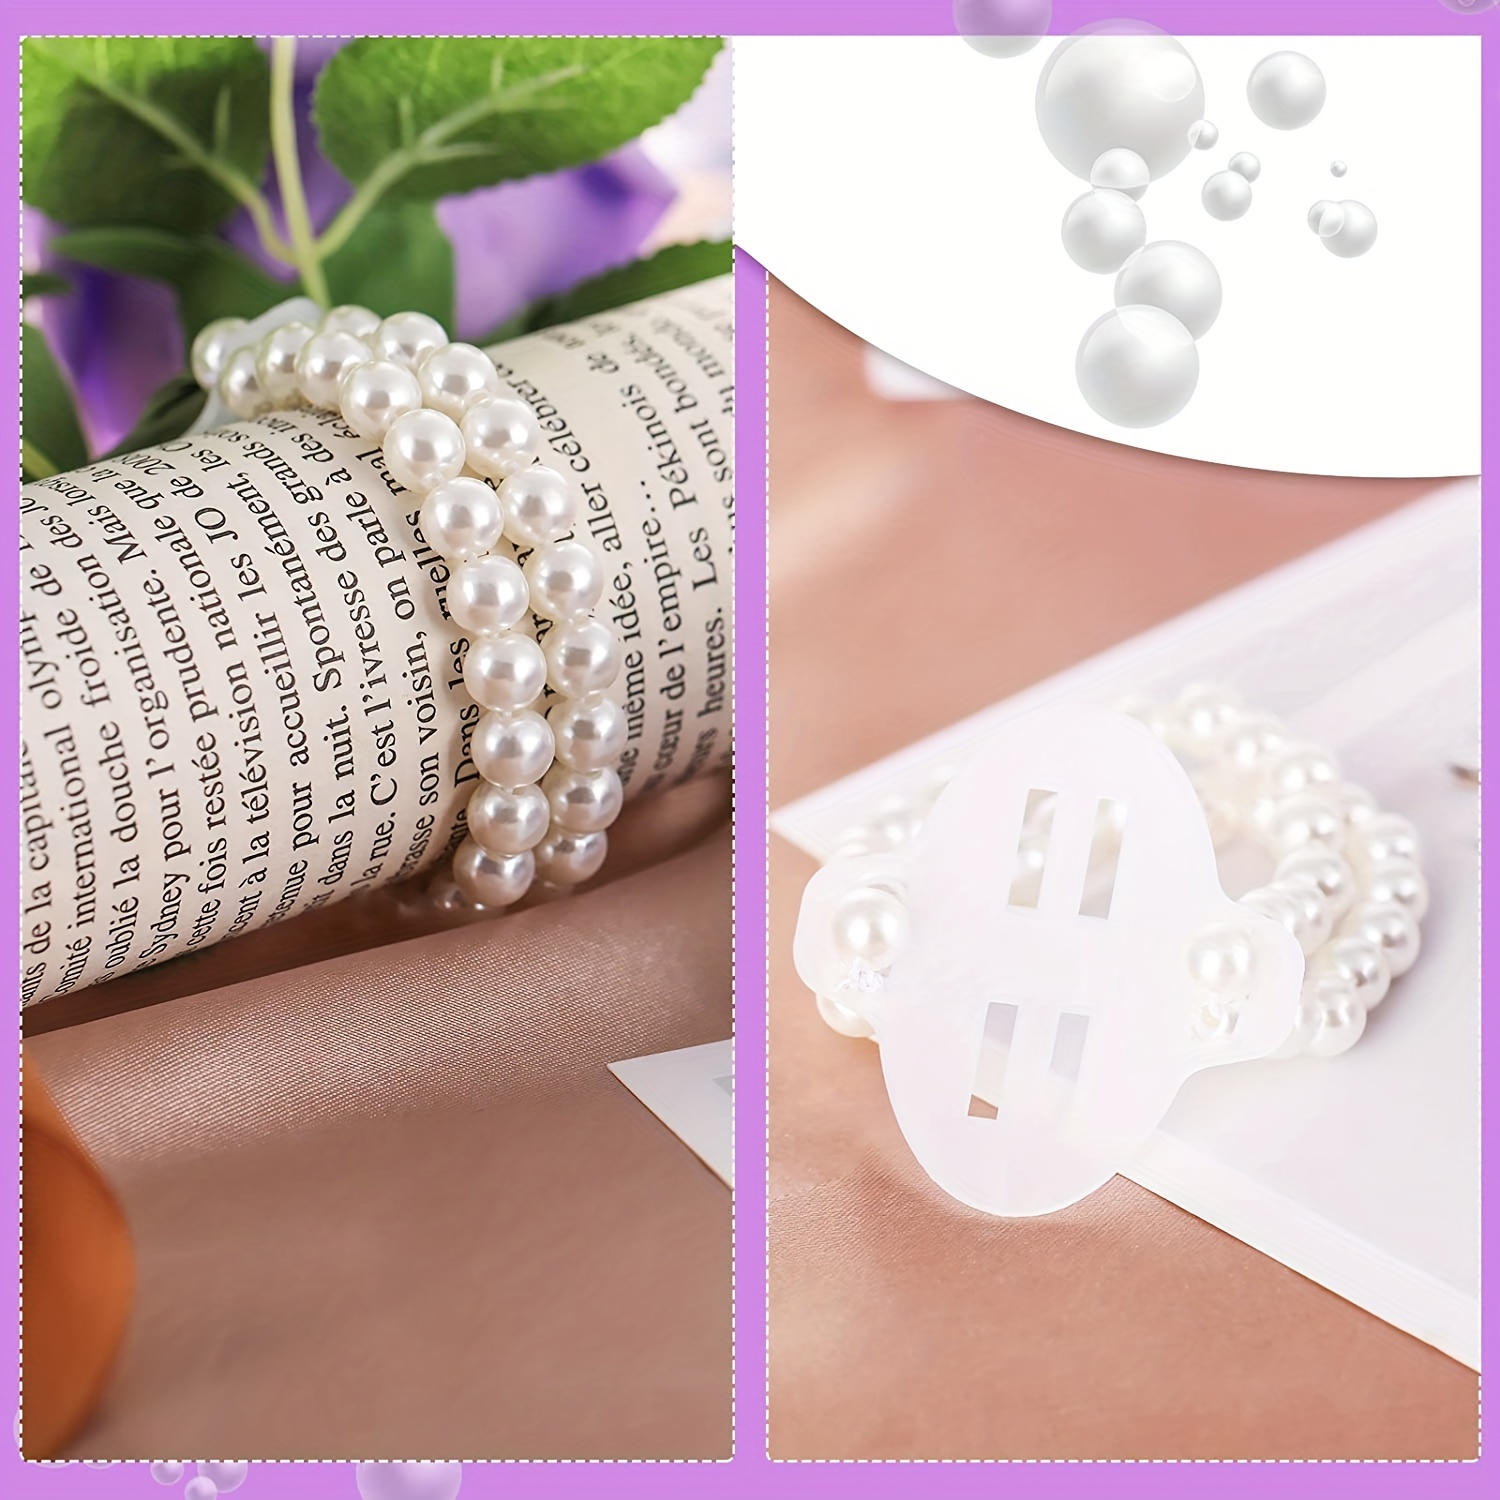 Elastic Pearl Bands Wrist Corsage Bands Wedding Corsages Pearl Bracelet 20  Pack Elastic Pearl Wedding Wristlets DIY Wrist Corsages Accessories for  Wedding Prom Hand Flowers Beach Party (White)